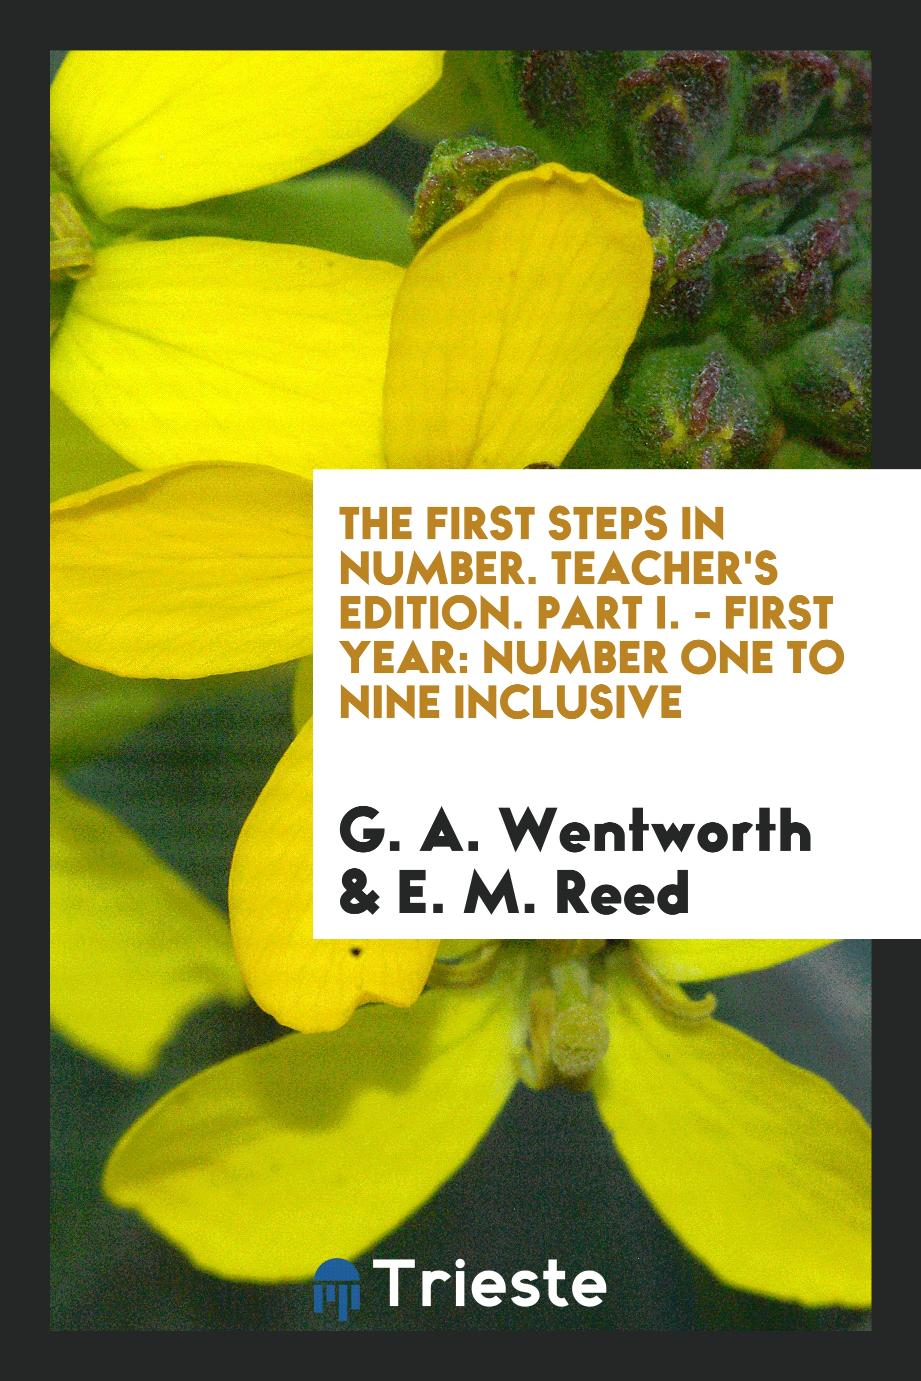 The First Steps in Number. Teacher's Edition. Part I. - First Year: Number One to Nine Inclusive